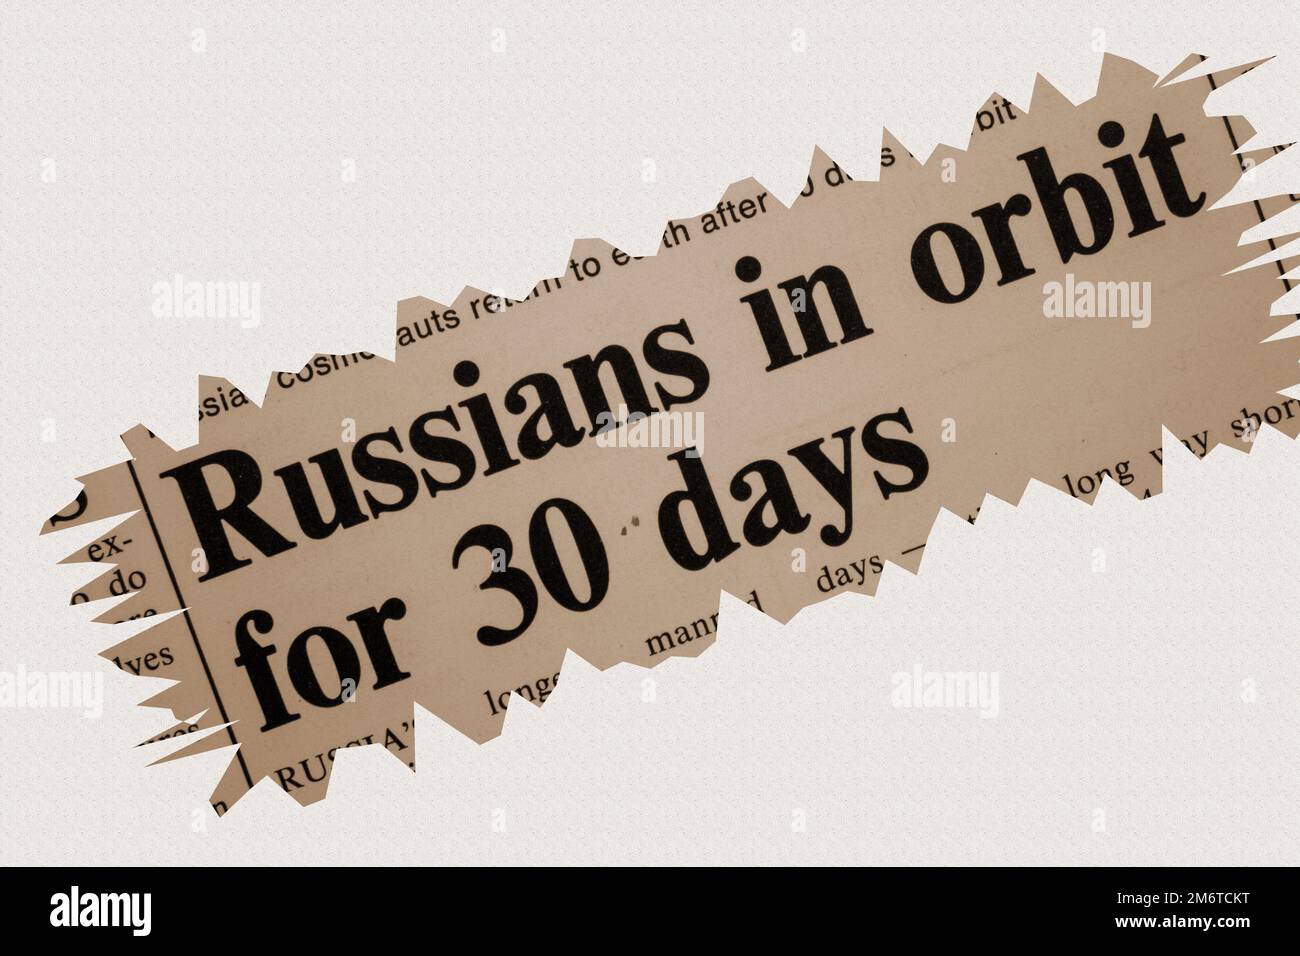 Russians in orbit for 30 days - news story from 1975 newspaper headline article title with overlay in sepia Stock Photo